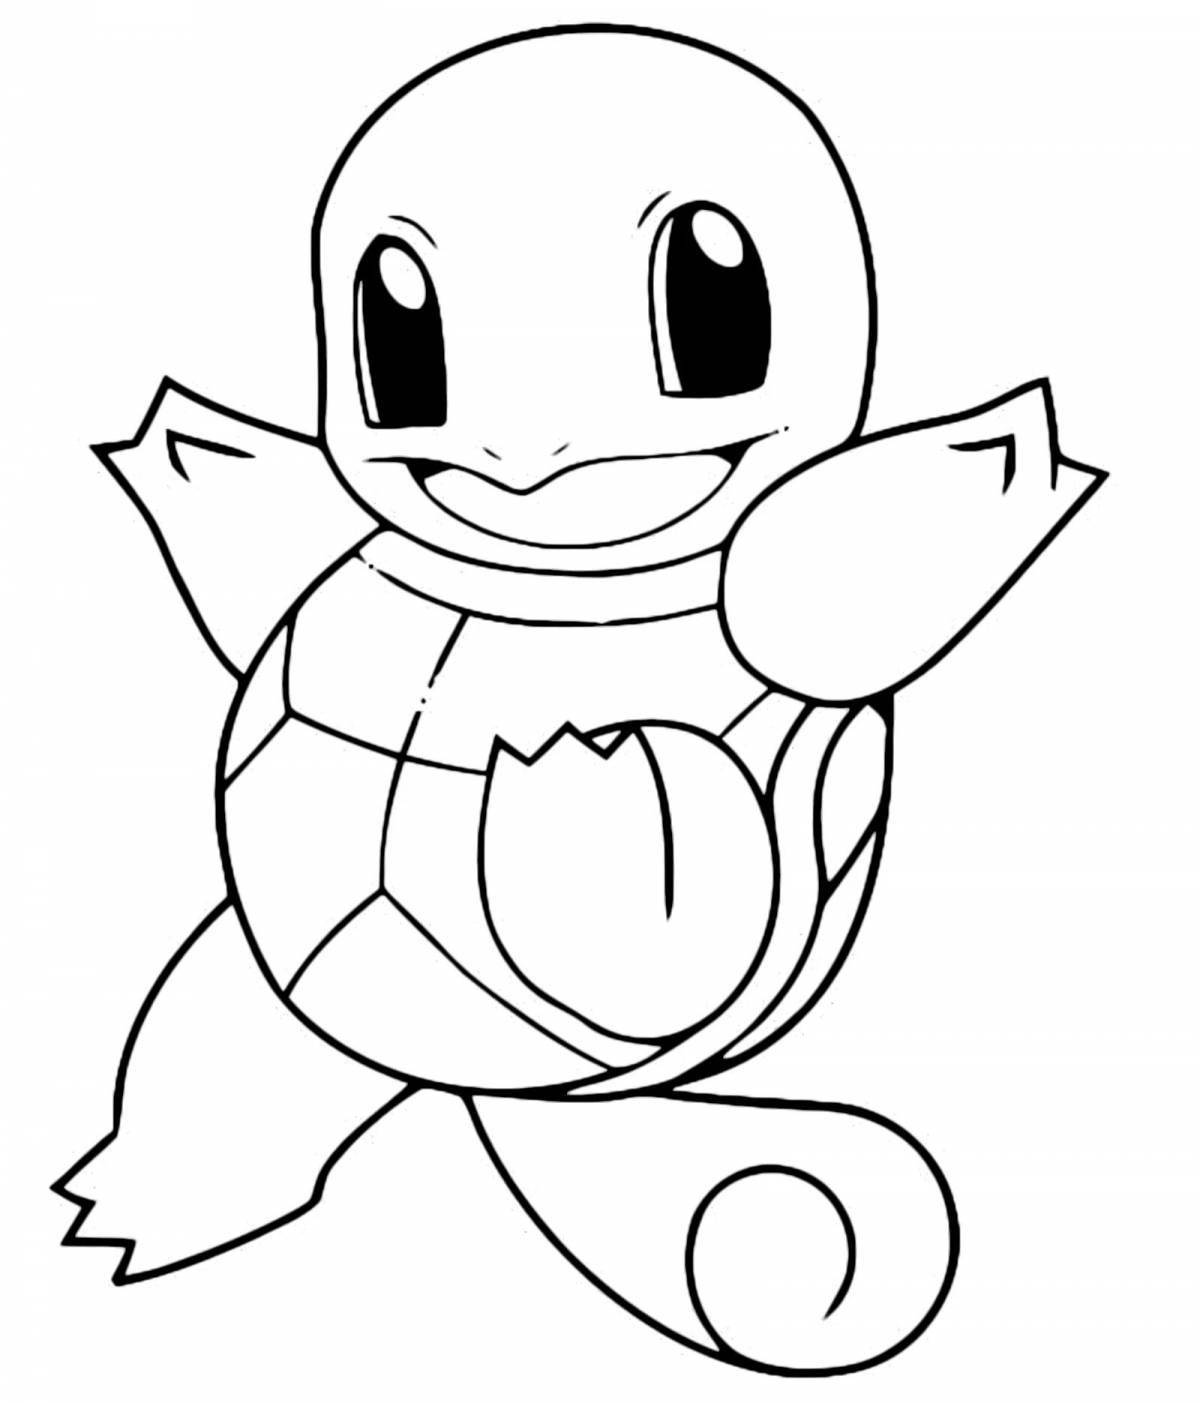 Coloring page of vibrant squirtle pokemon